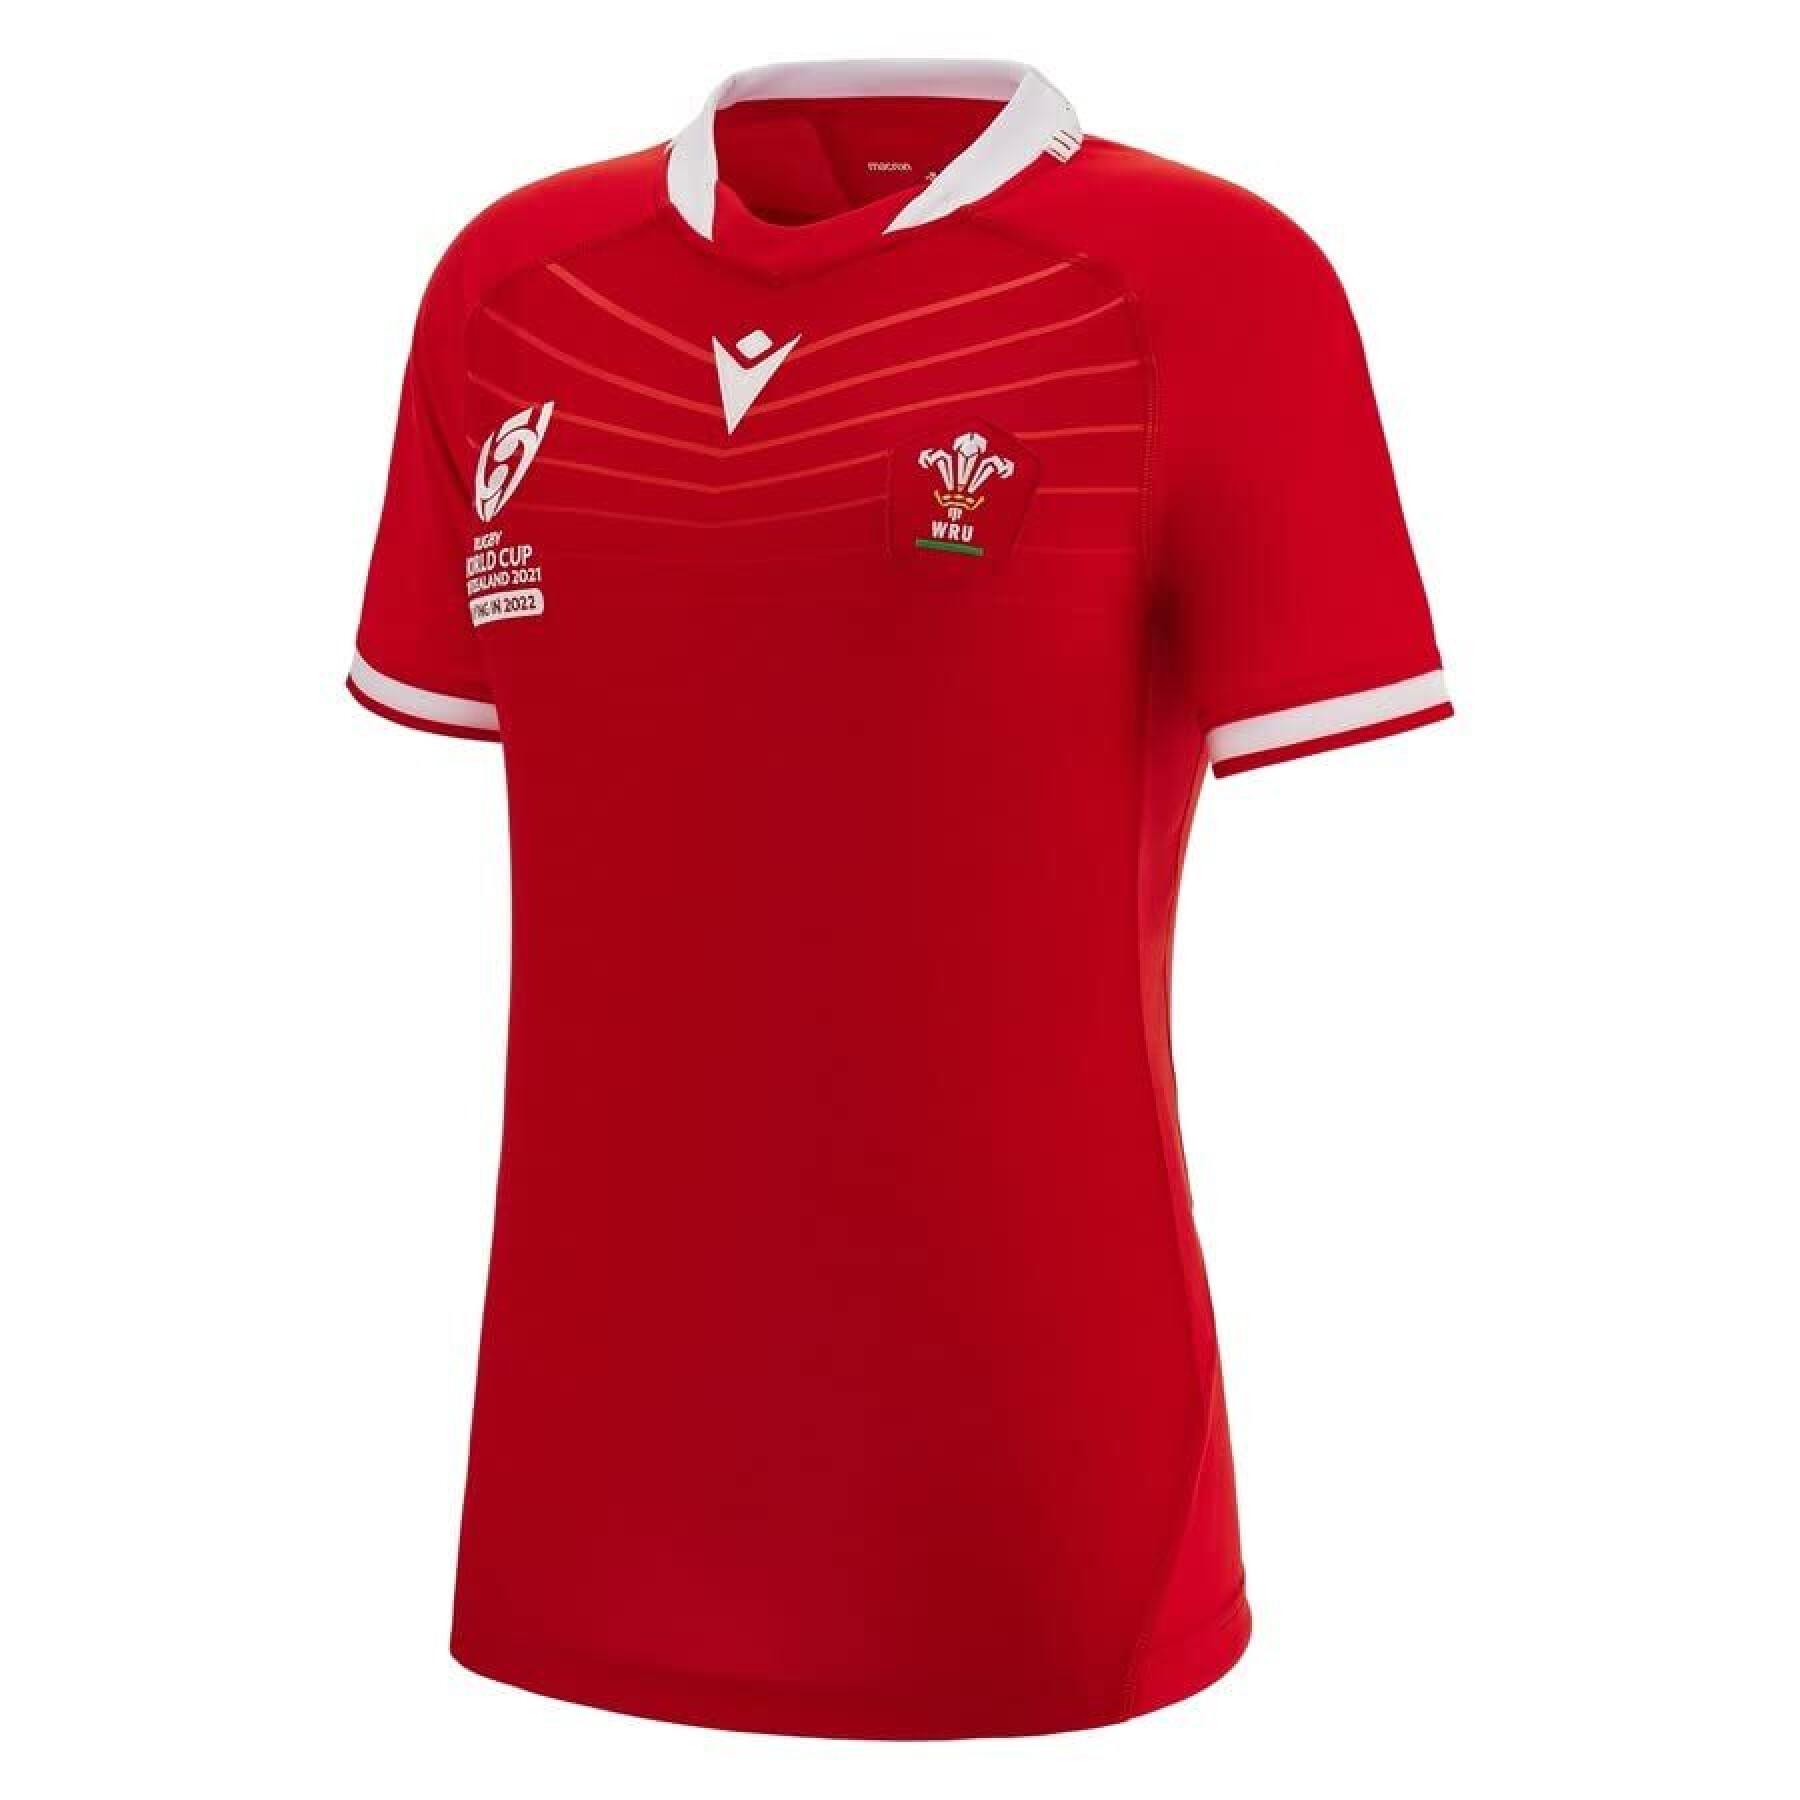 Maglia home donna Pays de Galles Rugby XV WRWC 2023